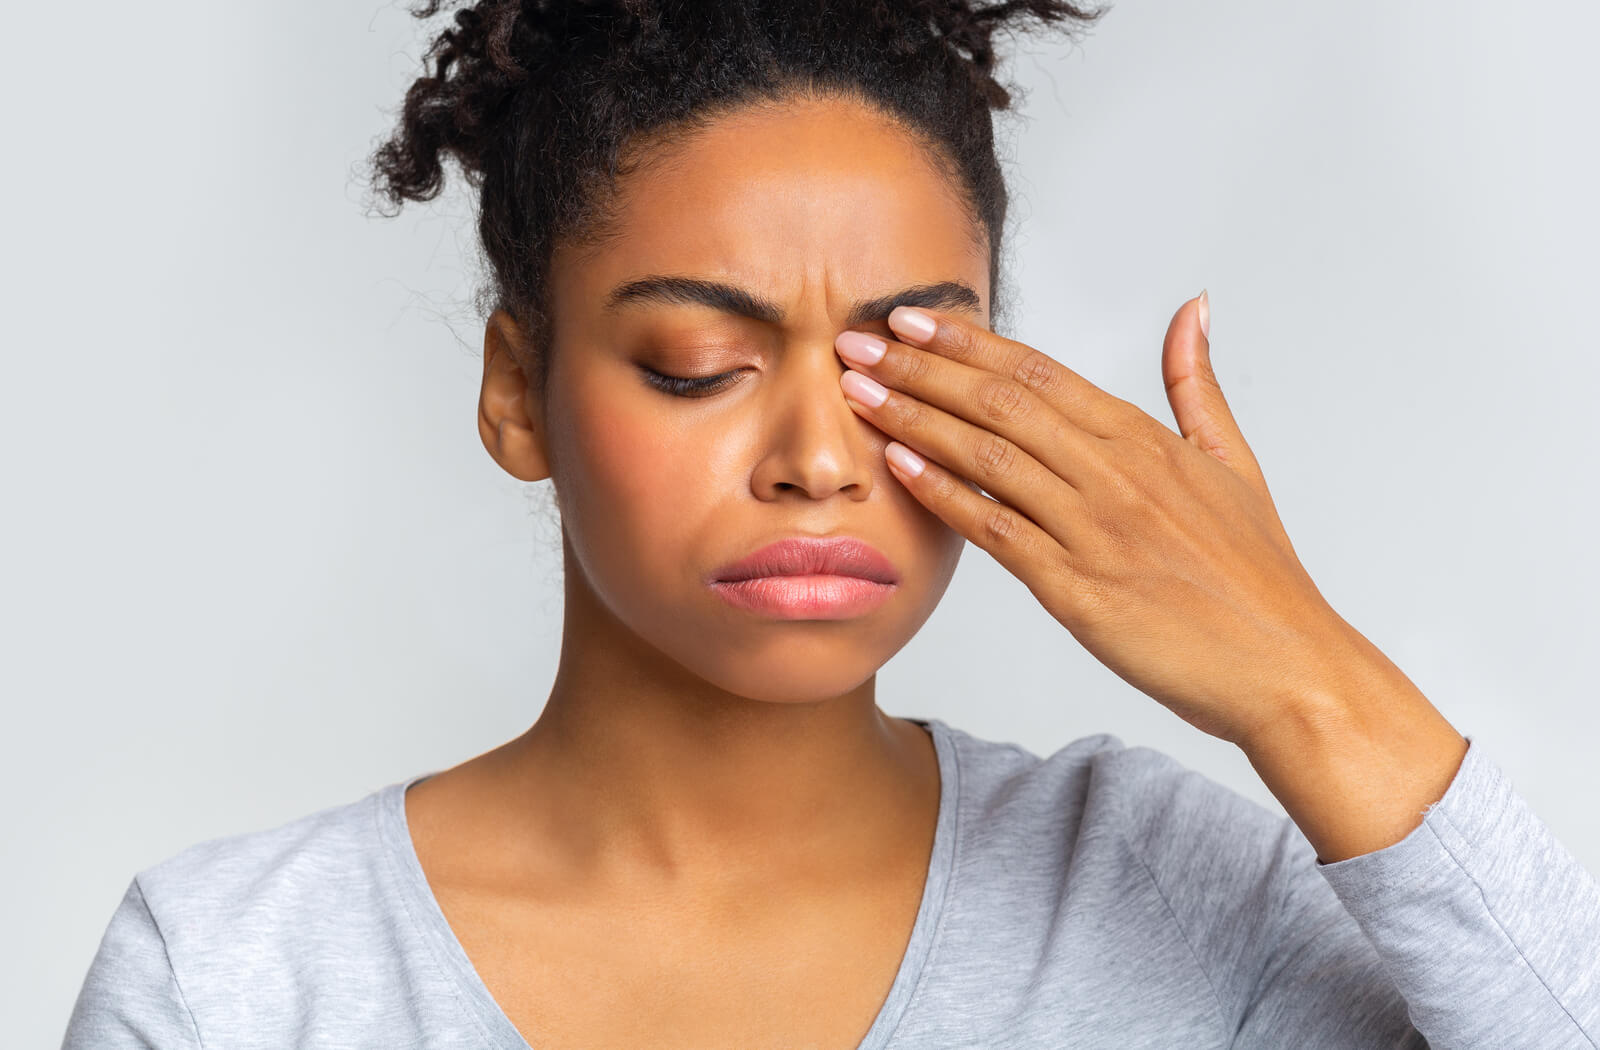 A woman rubbing her left eye due to dry eye